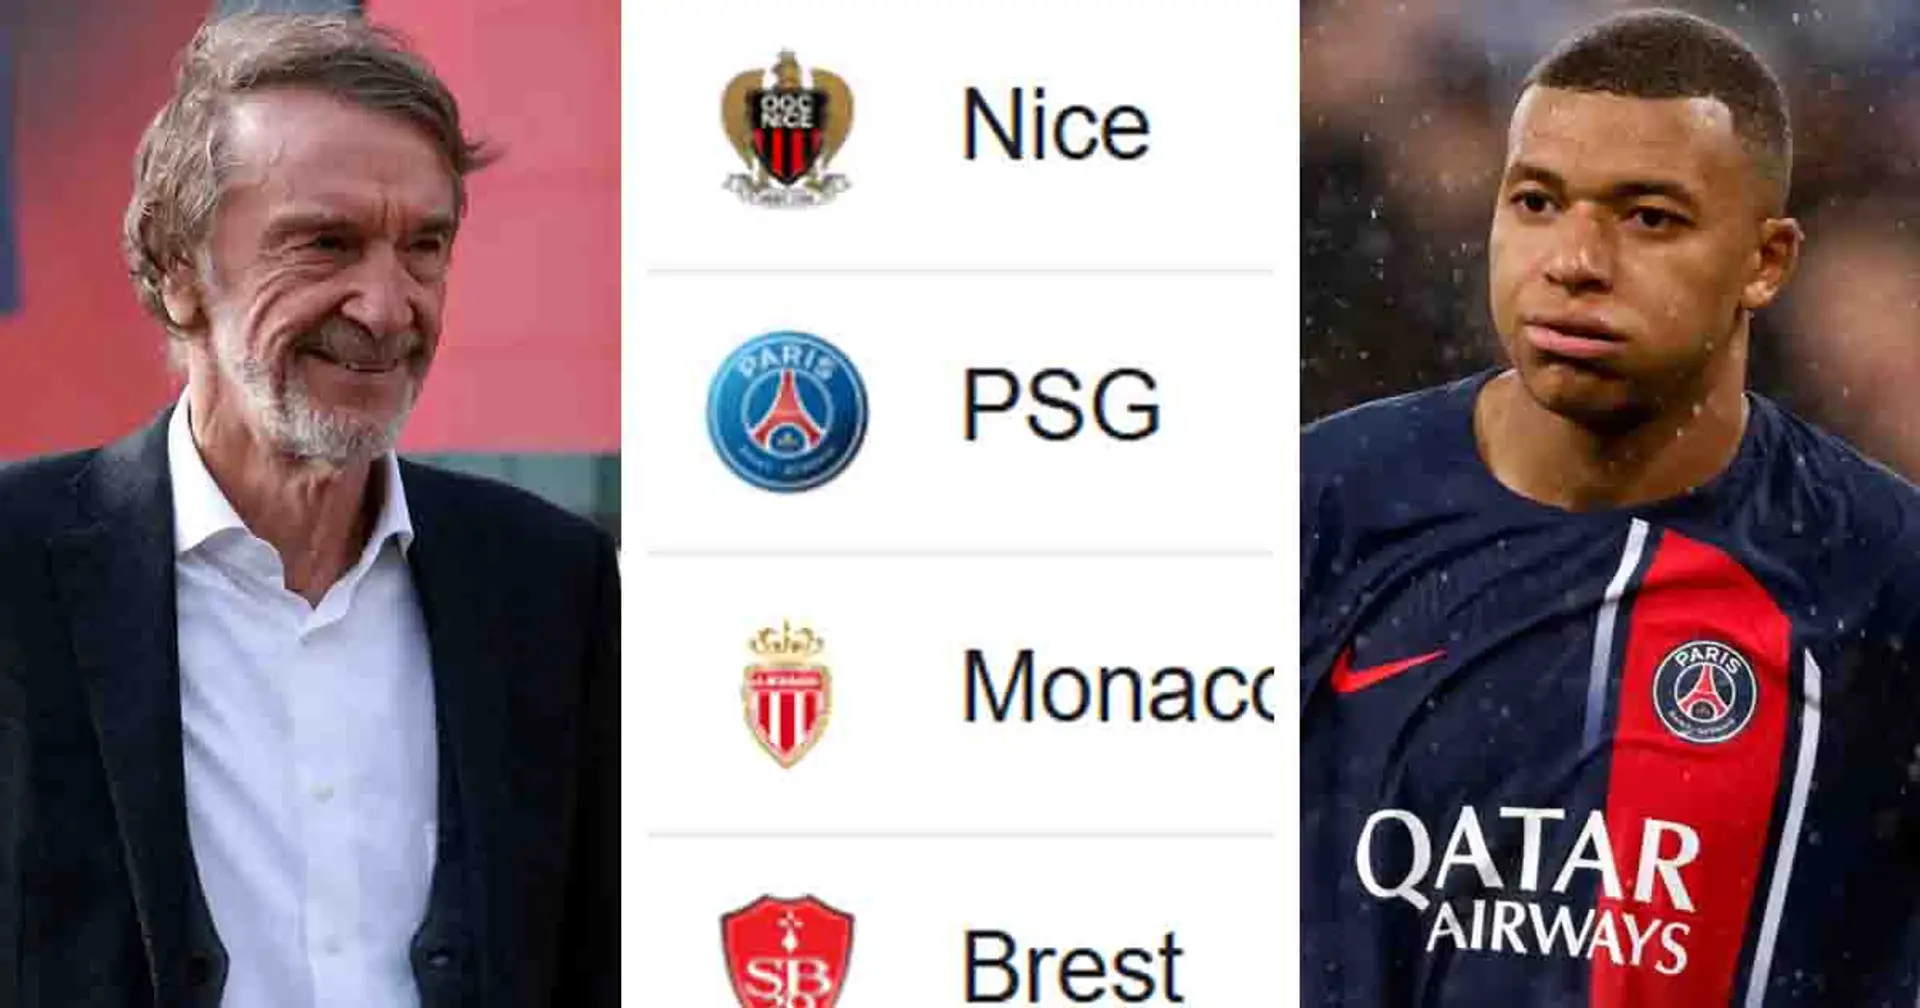 Sir Jim Ratcliffe's OGC Nice storm to top of Ligue 1 table, outperforming PSG